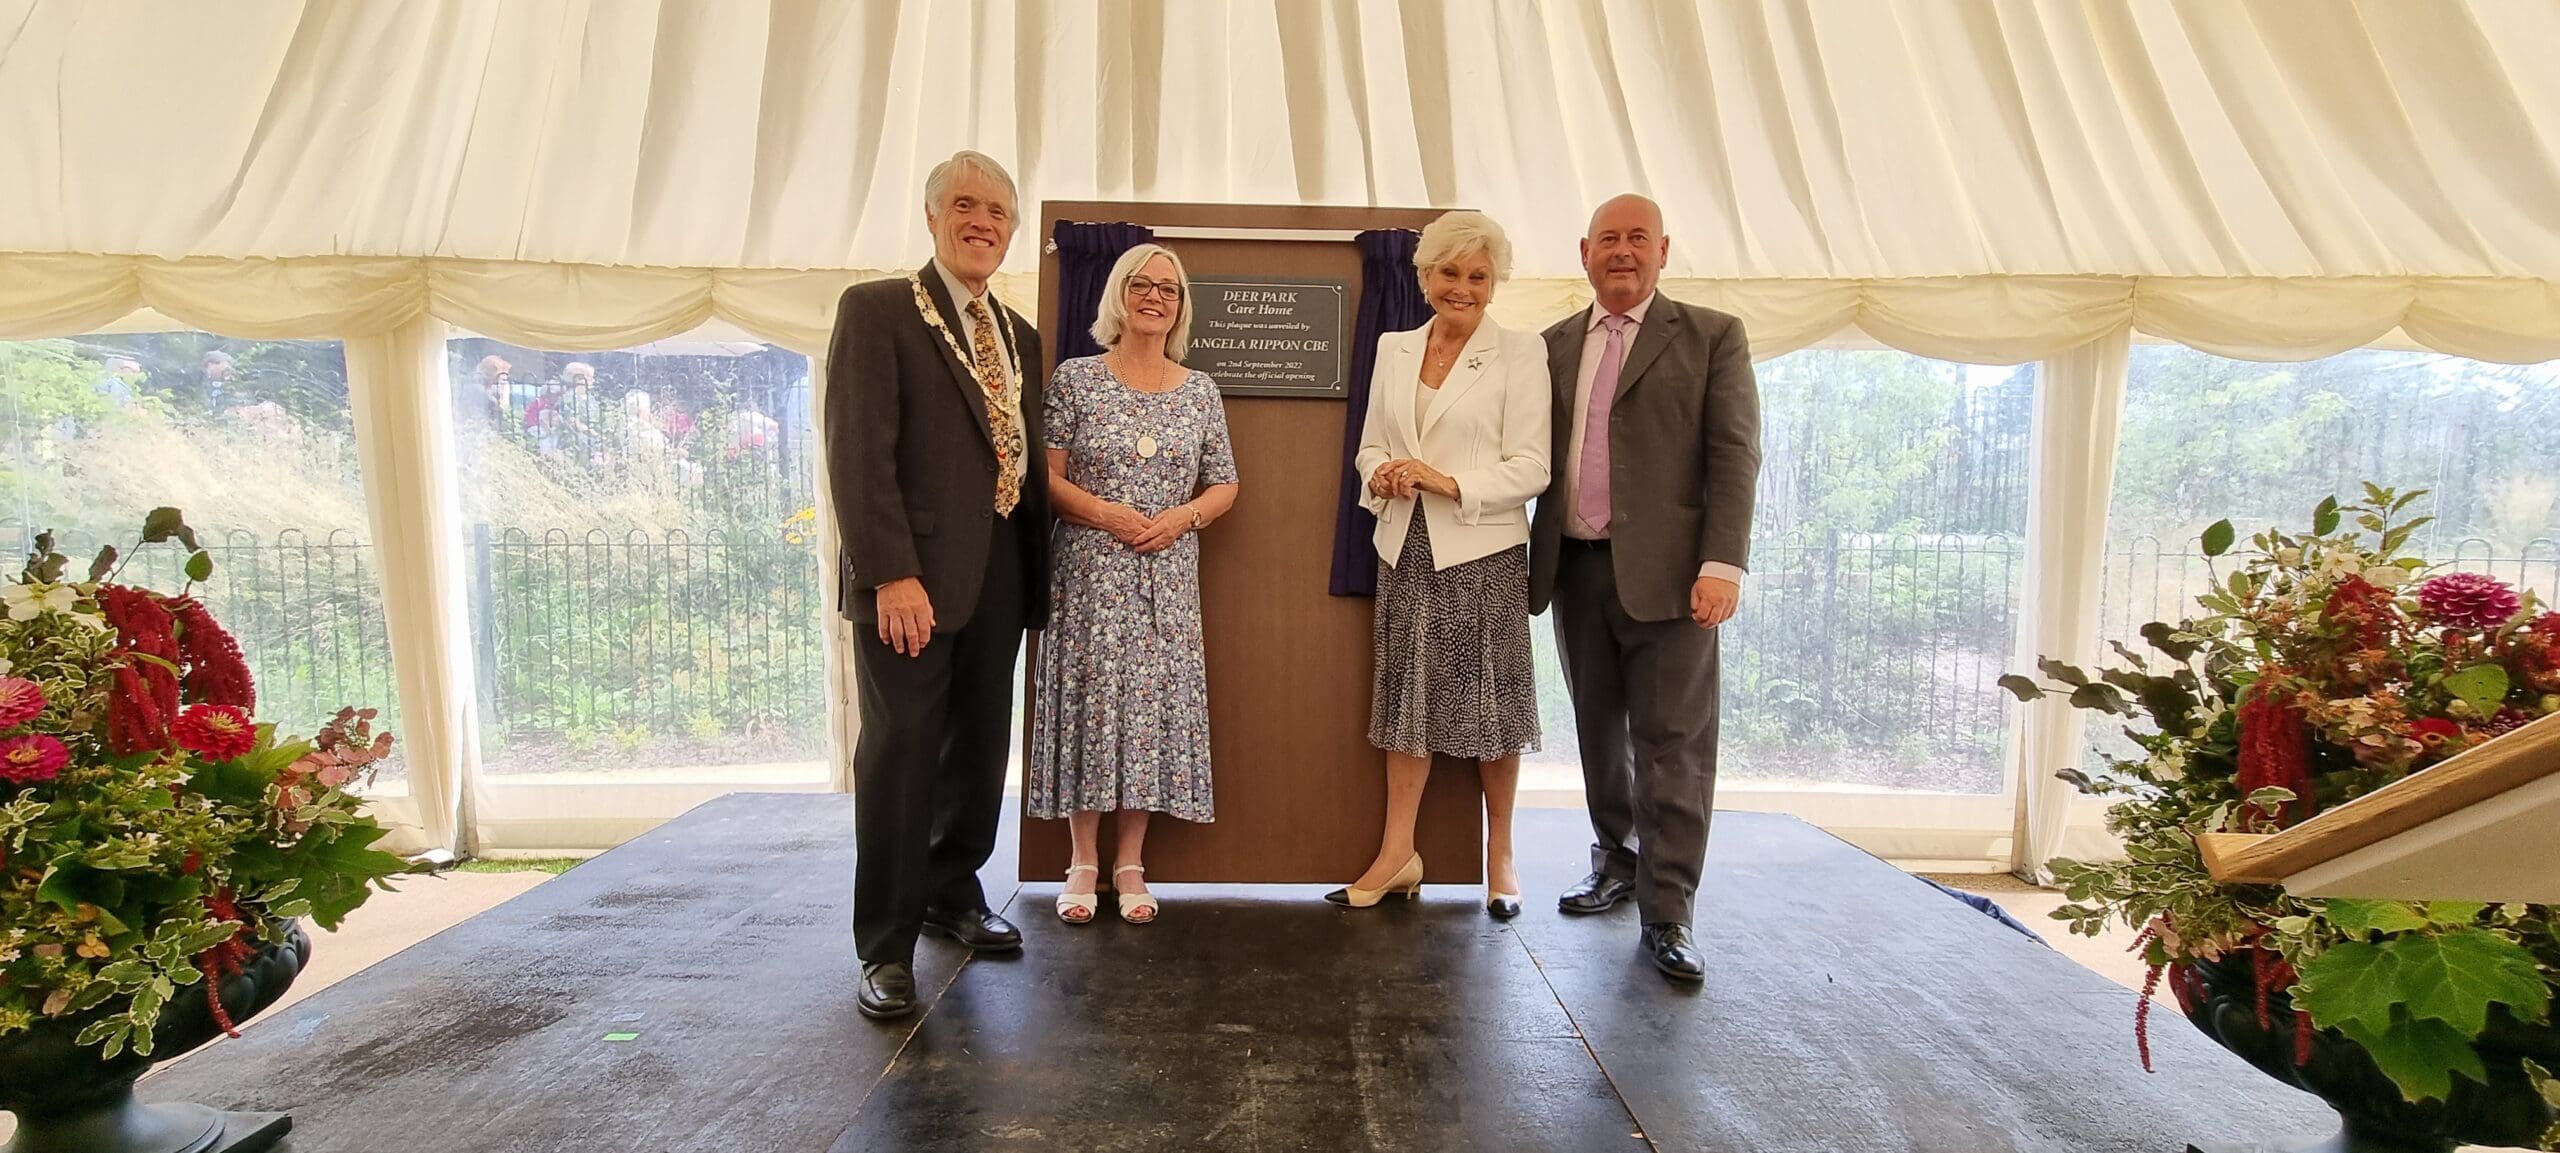 Angela Rippon Officially Opens Deer Park